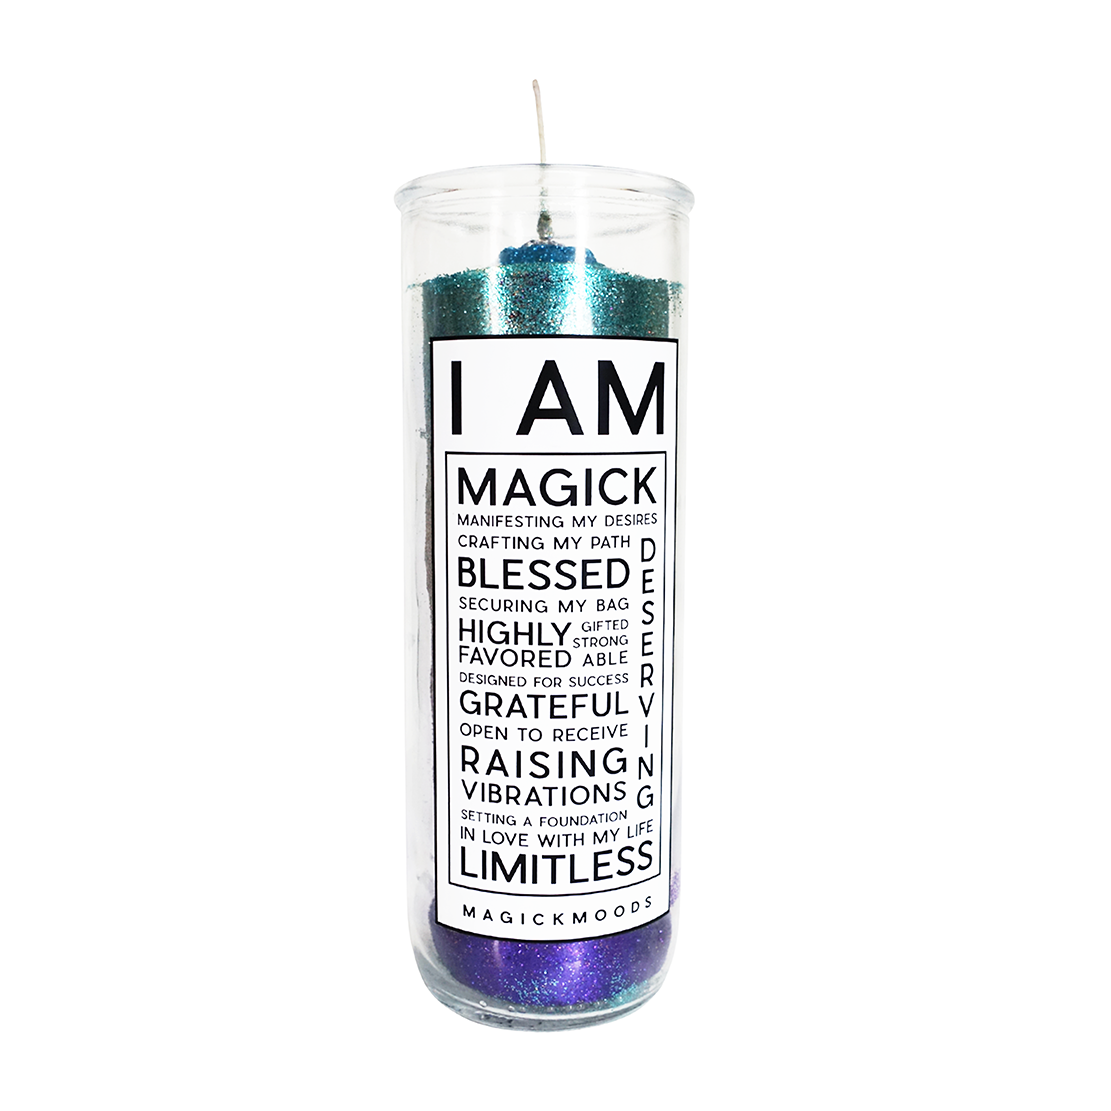 I Am Magick 7-Day Meditation Candle - PREORDER - Ships by July 28th, 2023